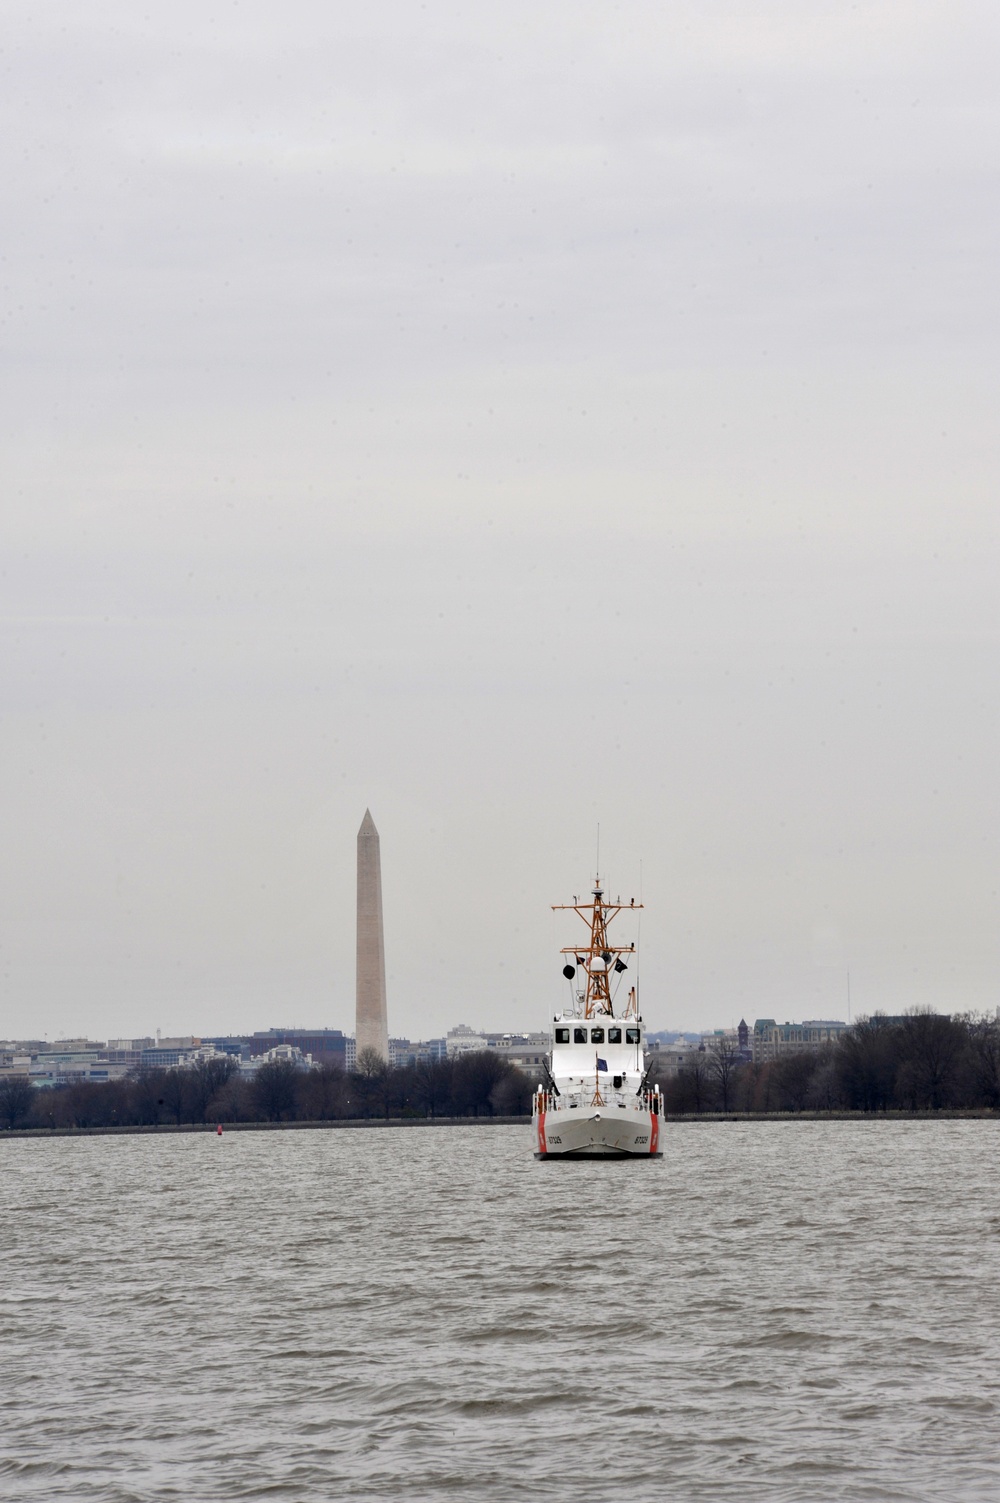 Coast Guard Cutter Cochito enforces the security zone along the Potomac River during the 57th Presidential Inauguration.